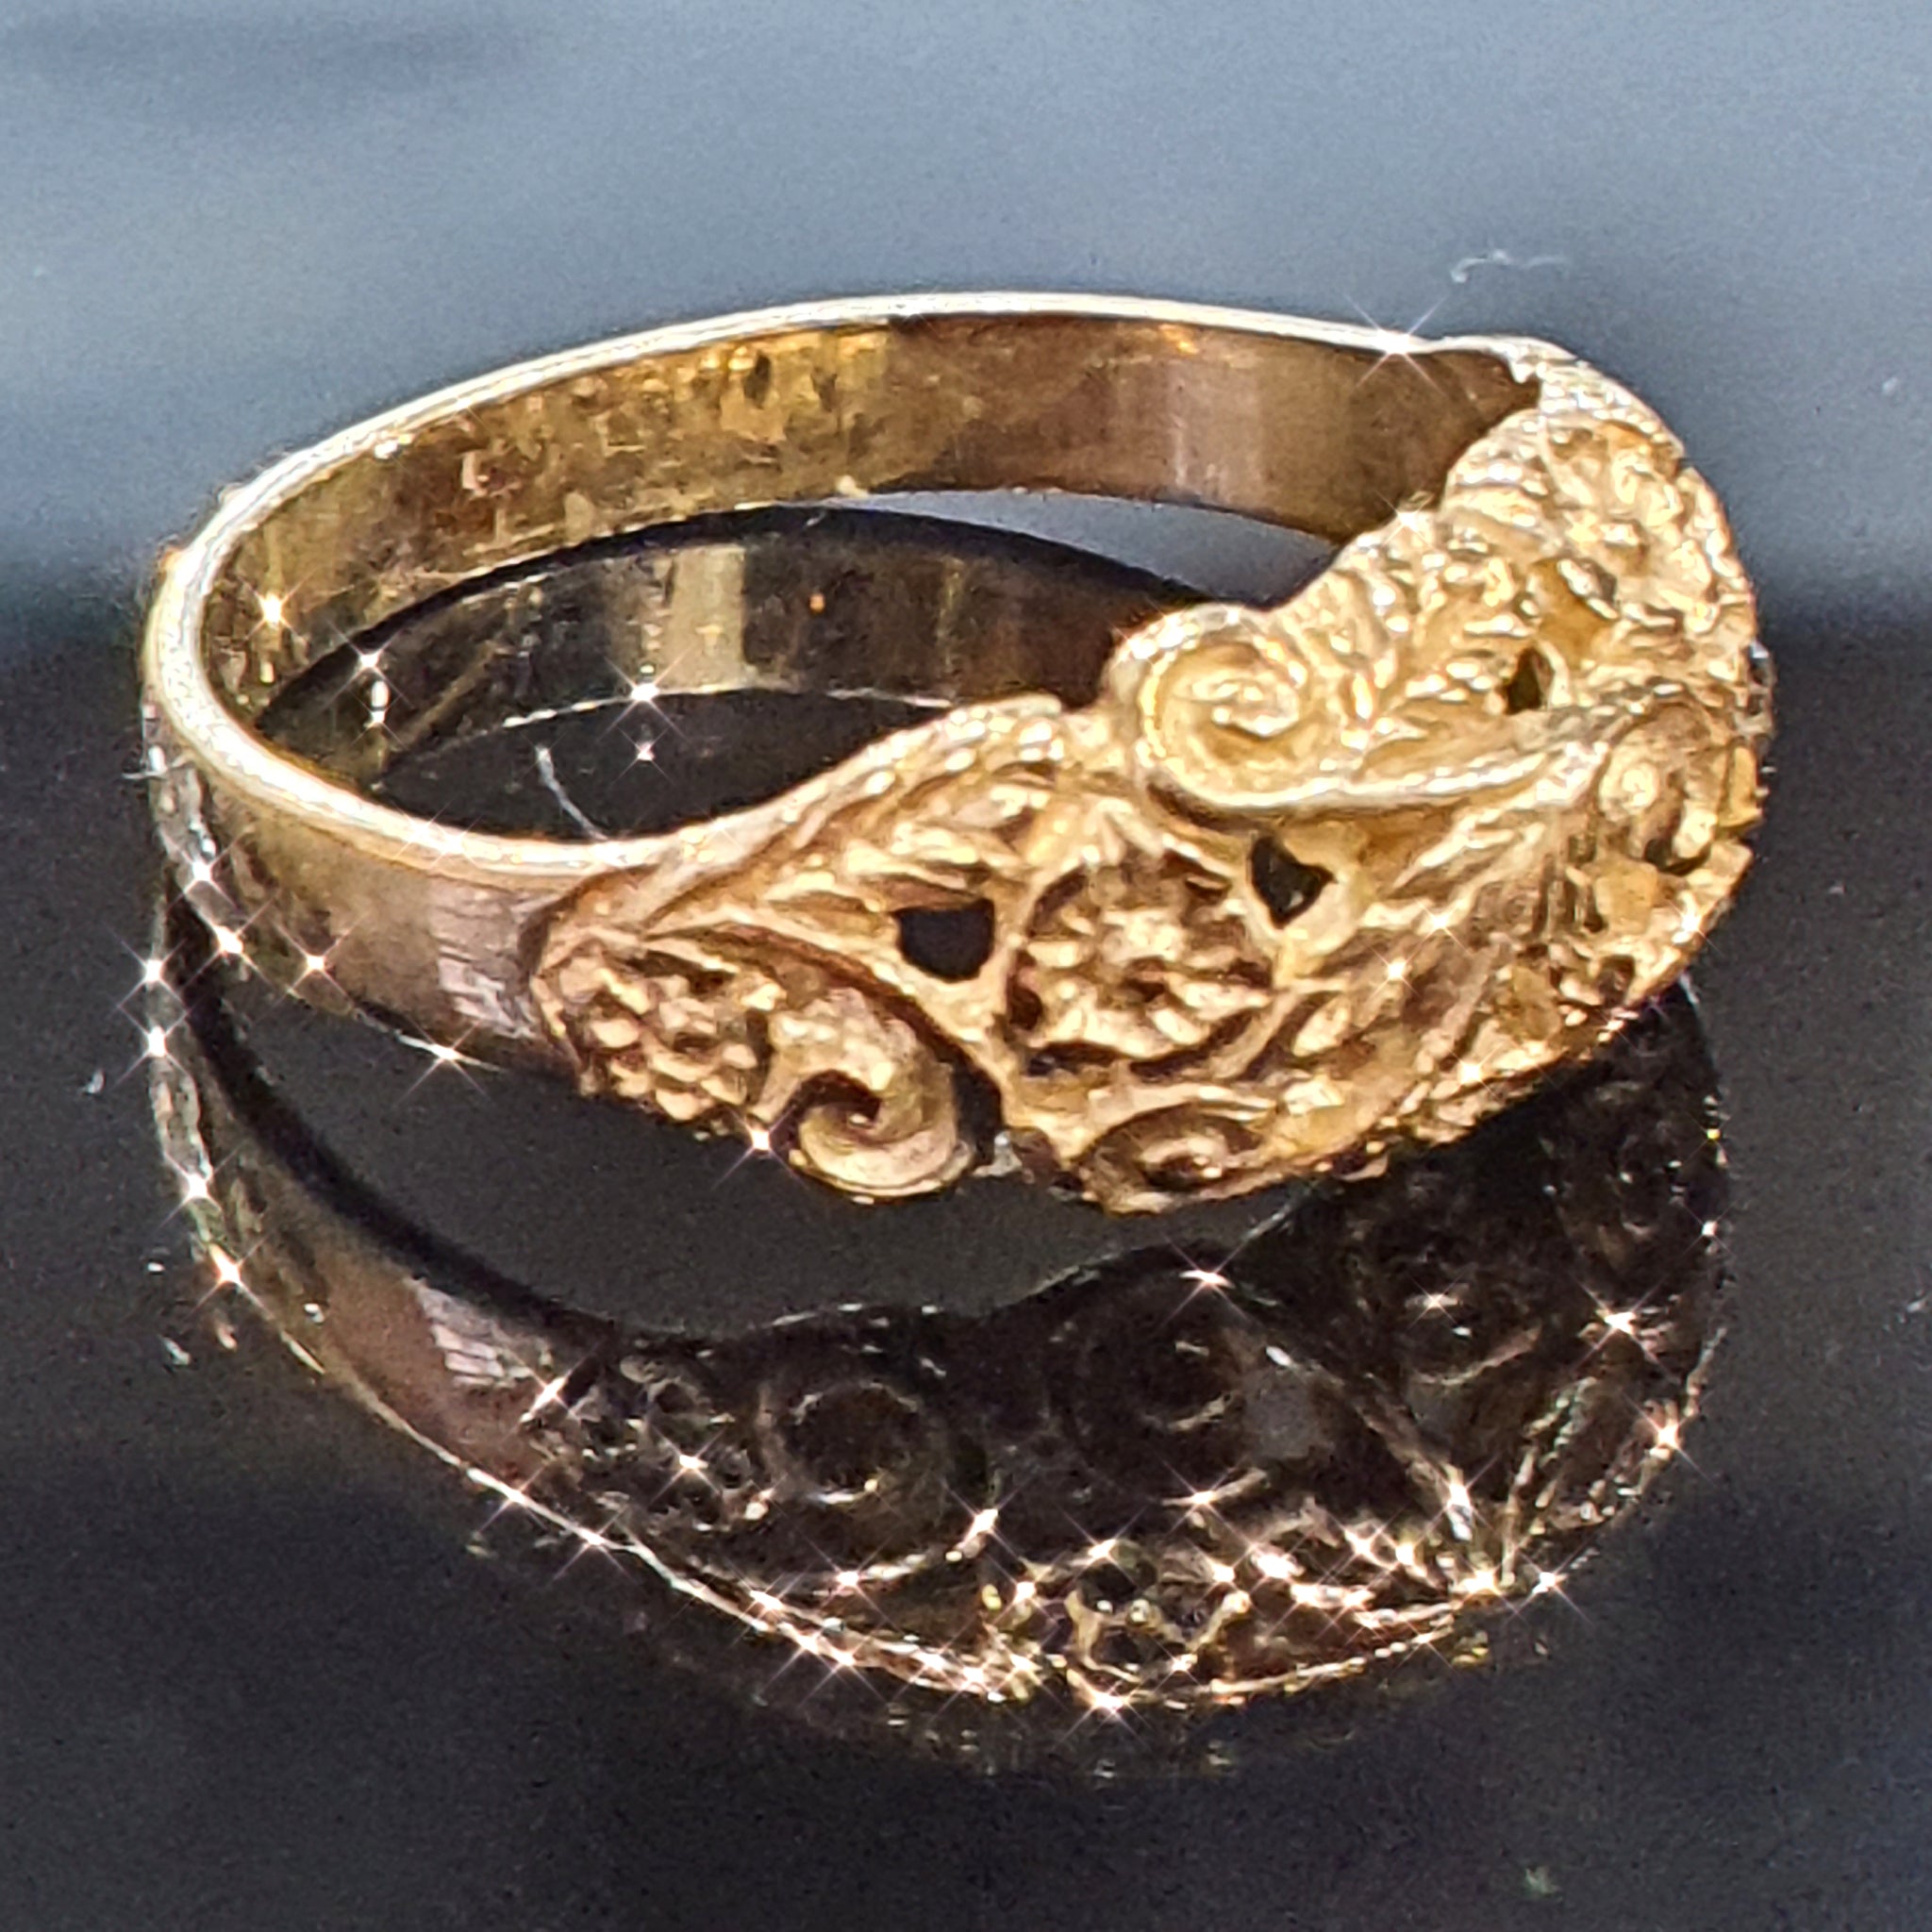 Foral Design 9ct Yellow Gold Ring